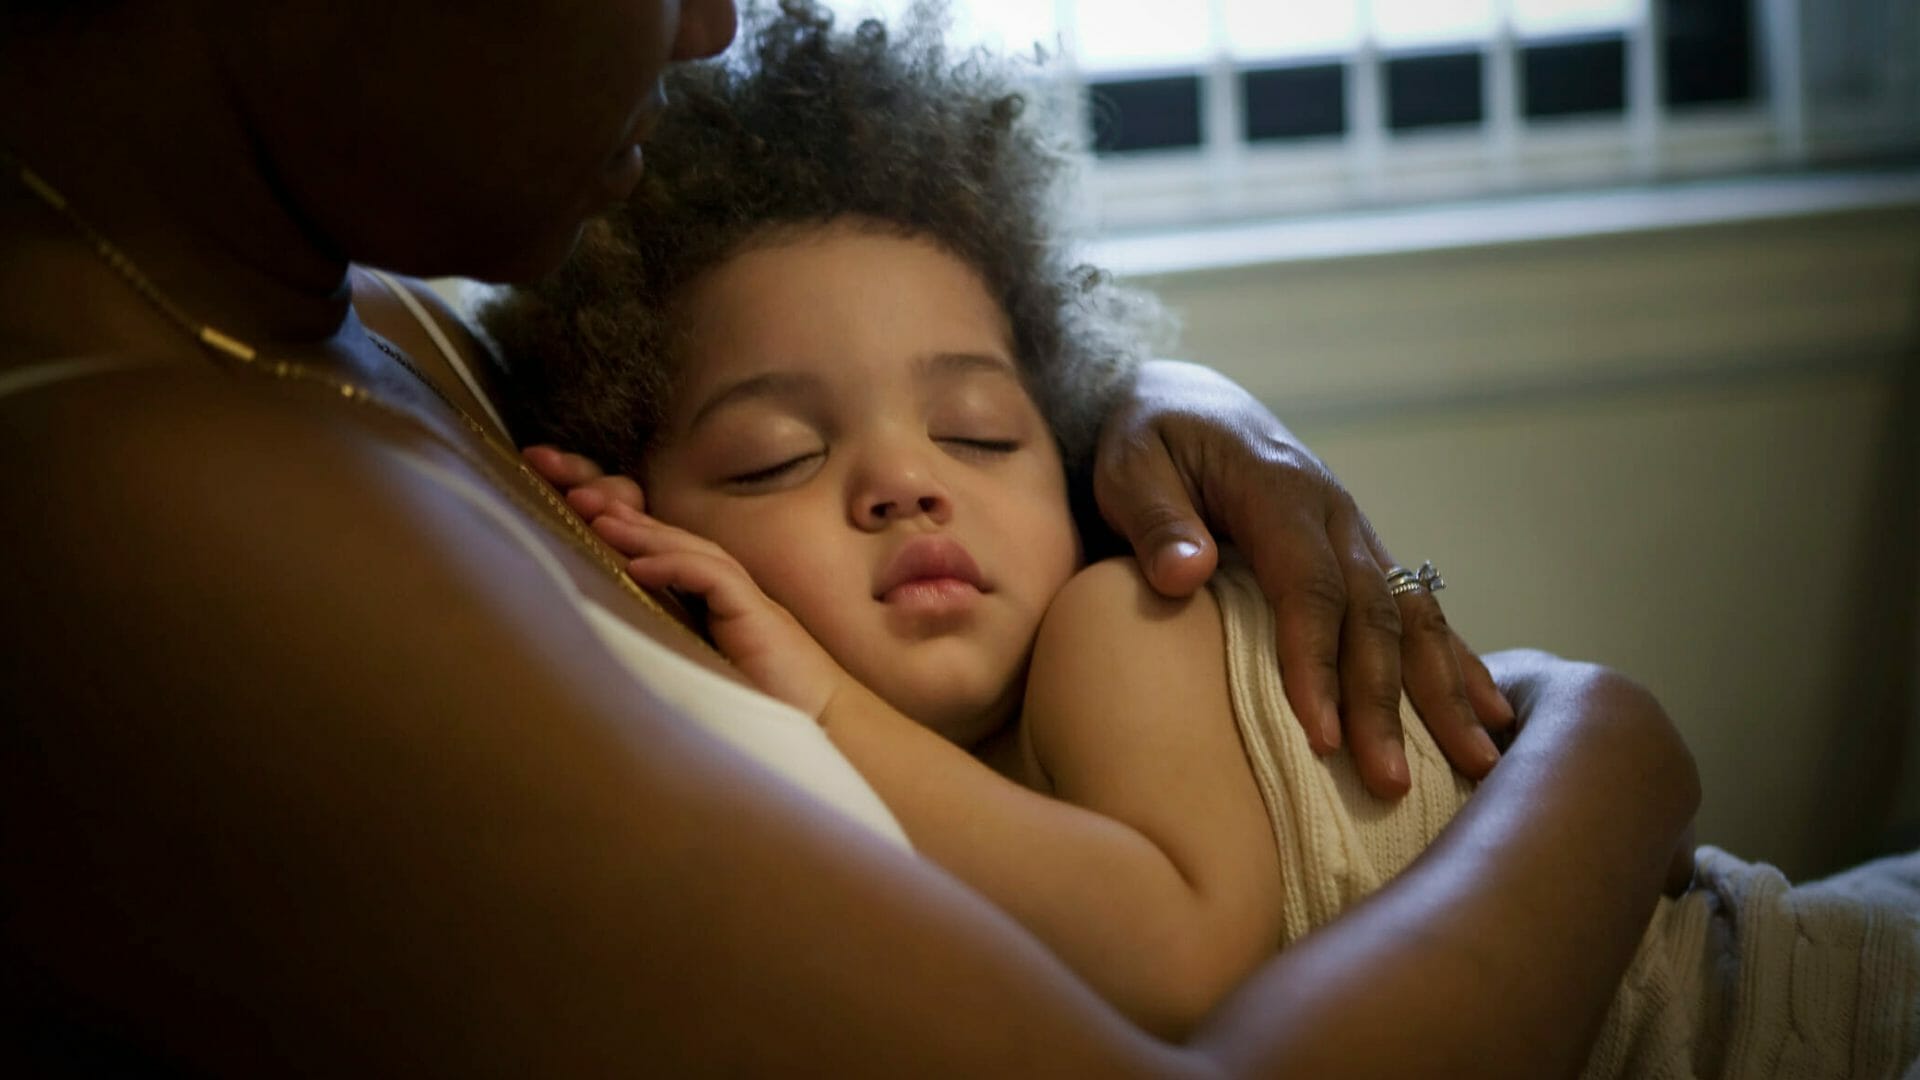 A sleeping child held by a caretaker